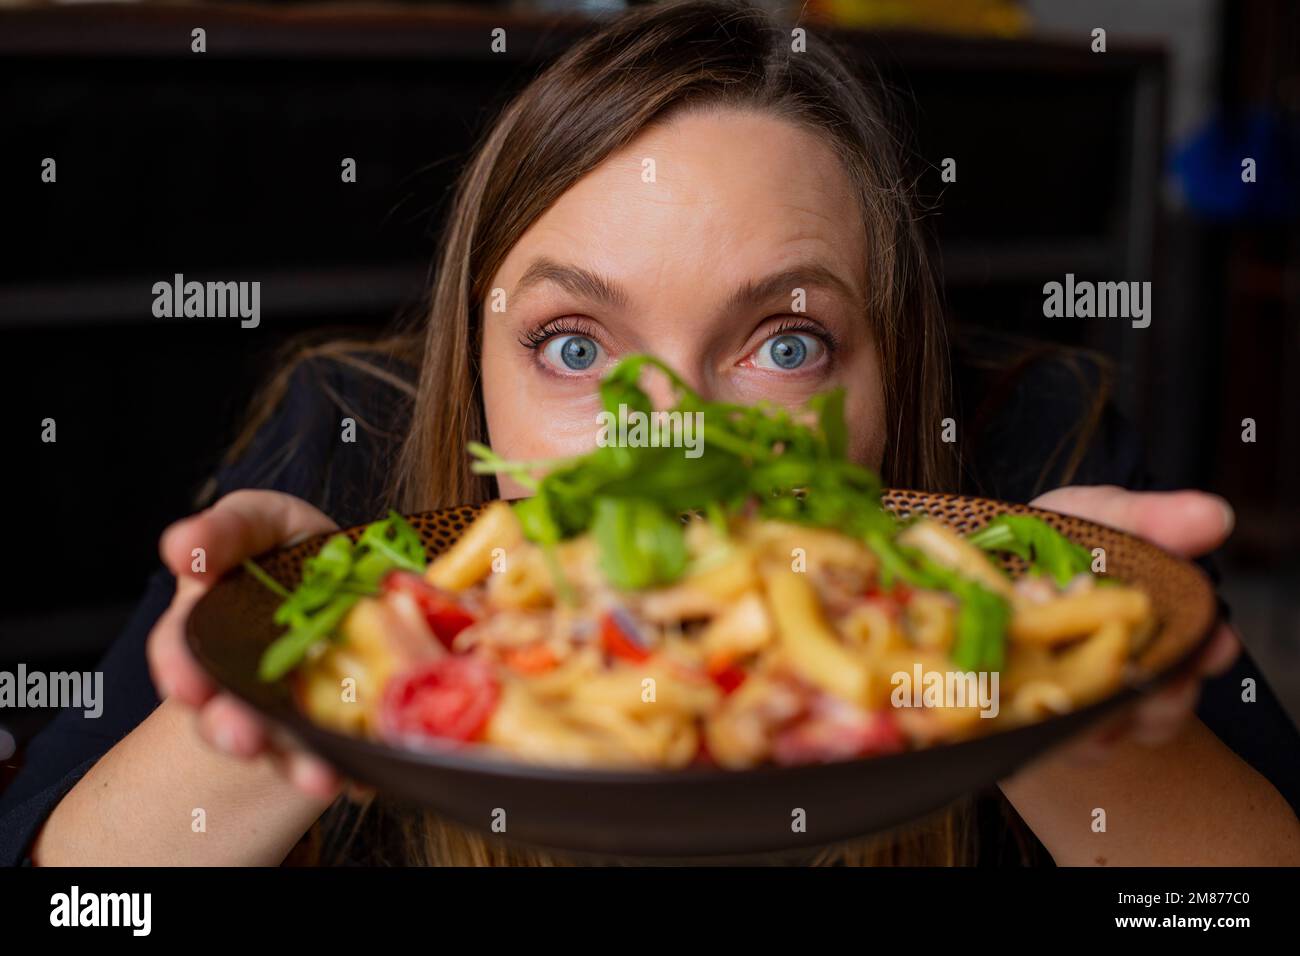 Portrait of middle-aged woman staring wide-eyed at camera, showing tasty pasta with cherry tomatoes, arugula and cheese. Stock Photo